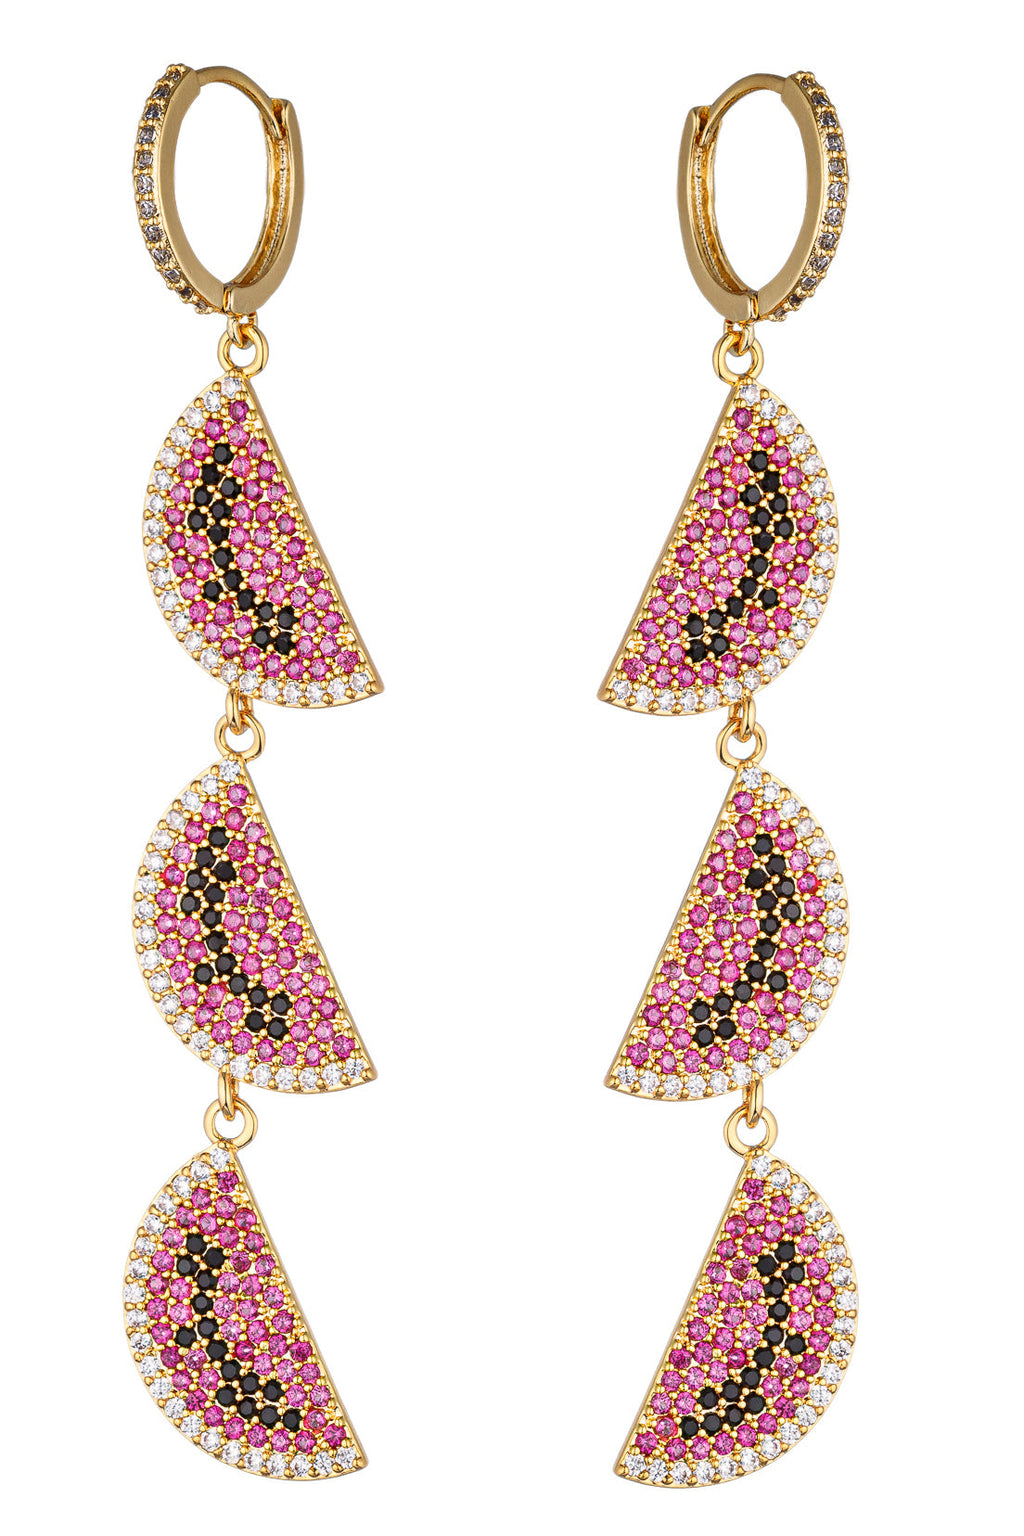 Add a juicy pop of color with these earrings adorned with watermelon-slice cubic zirconia, a fresh and delightful accessory.